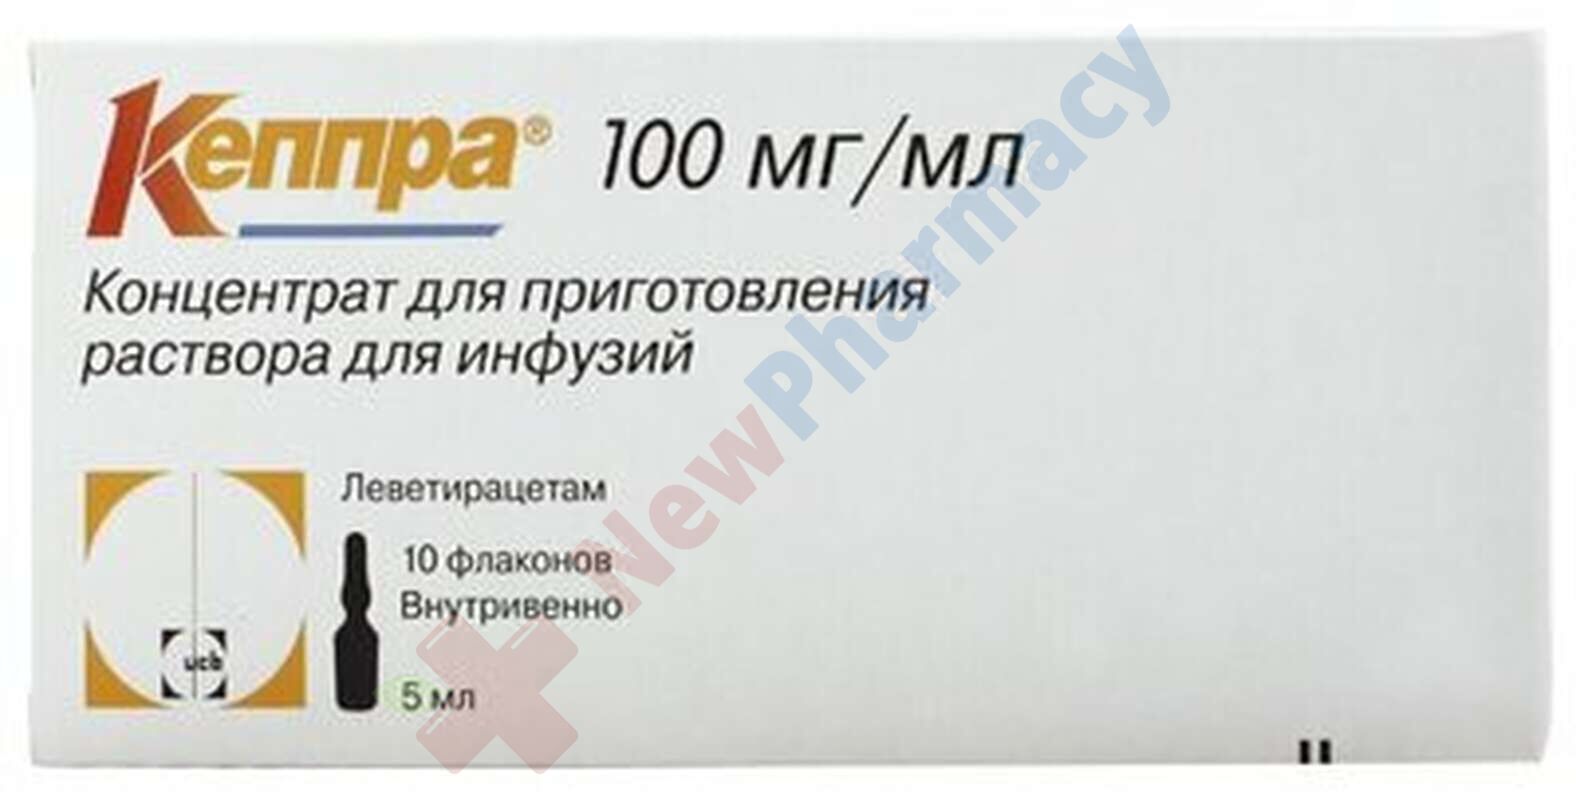 Buy Keppra injections online